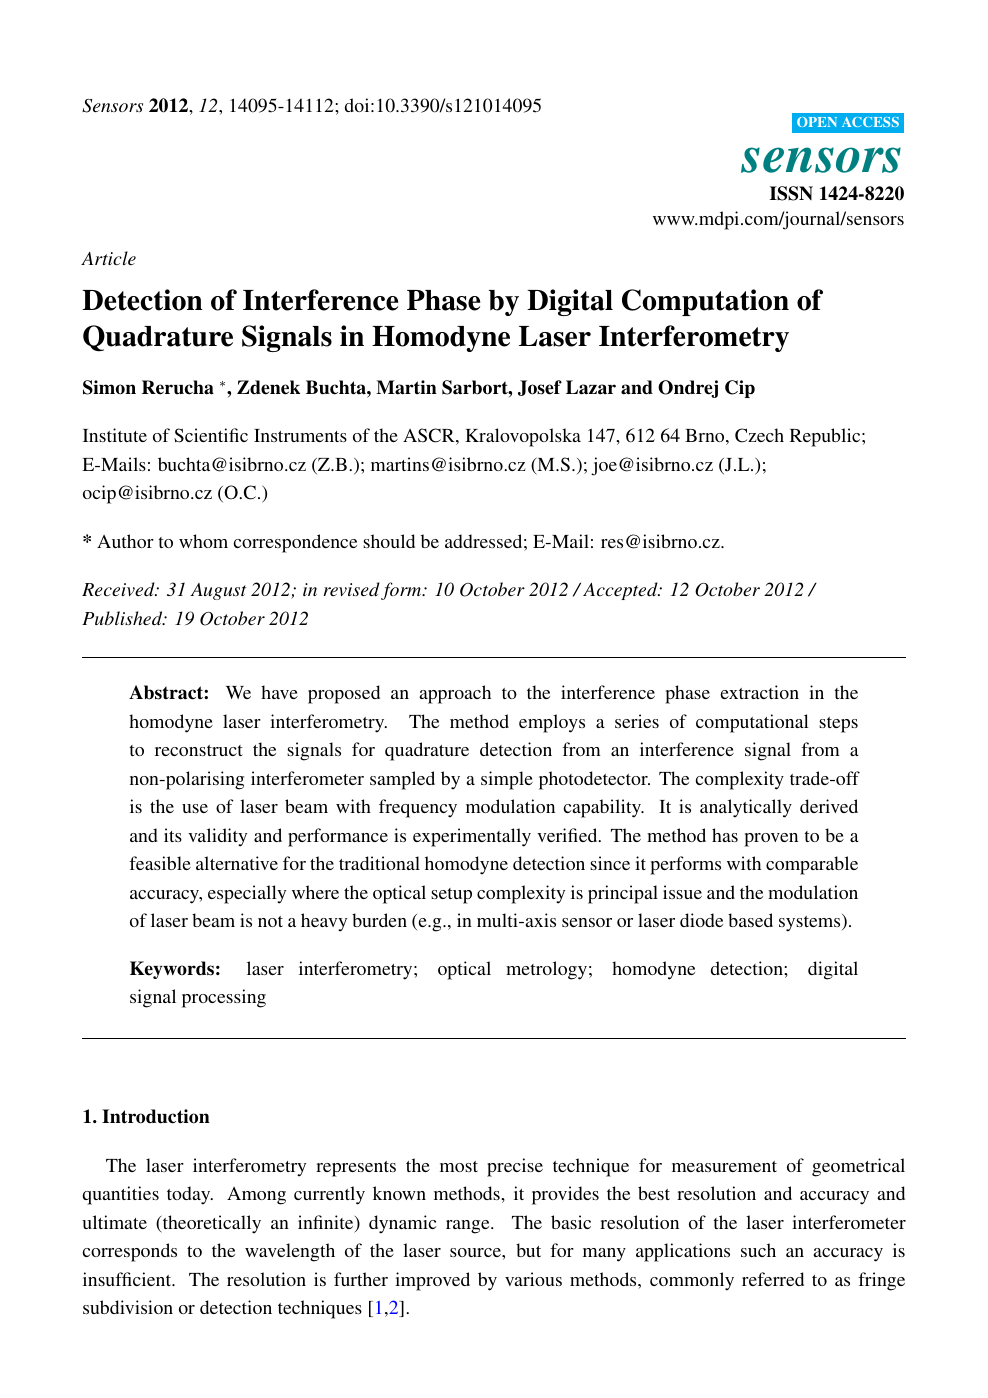 Detection Of Interference Phase By Digital Computation Of Quadrature Signals In Homodyne Laser Interferometry Topic Of Research Paper In Physical Sciences Download Scholarly Article Pdf And Read For Free On Cyberleninka